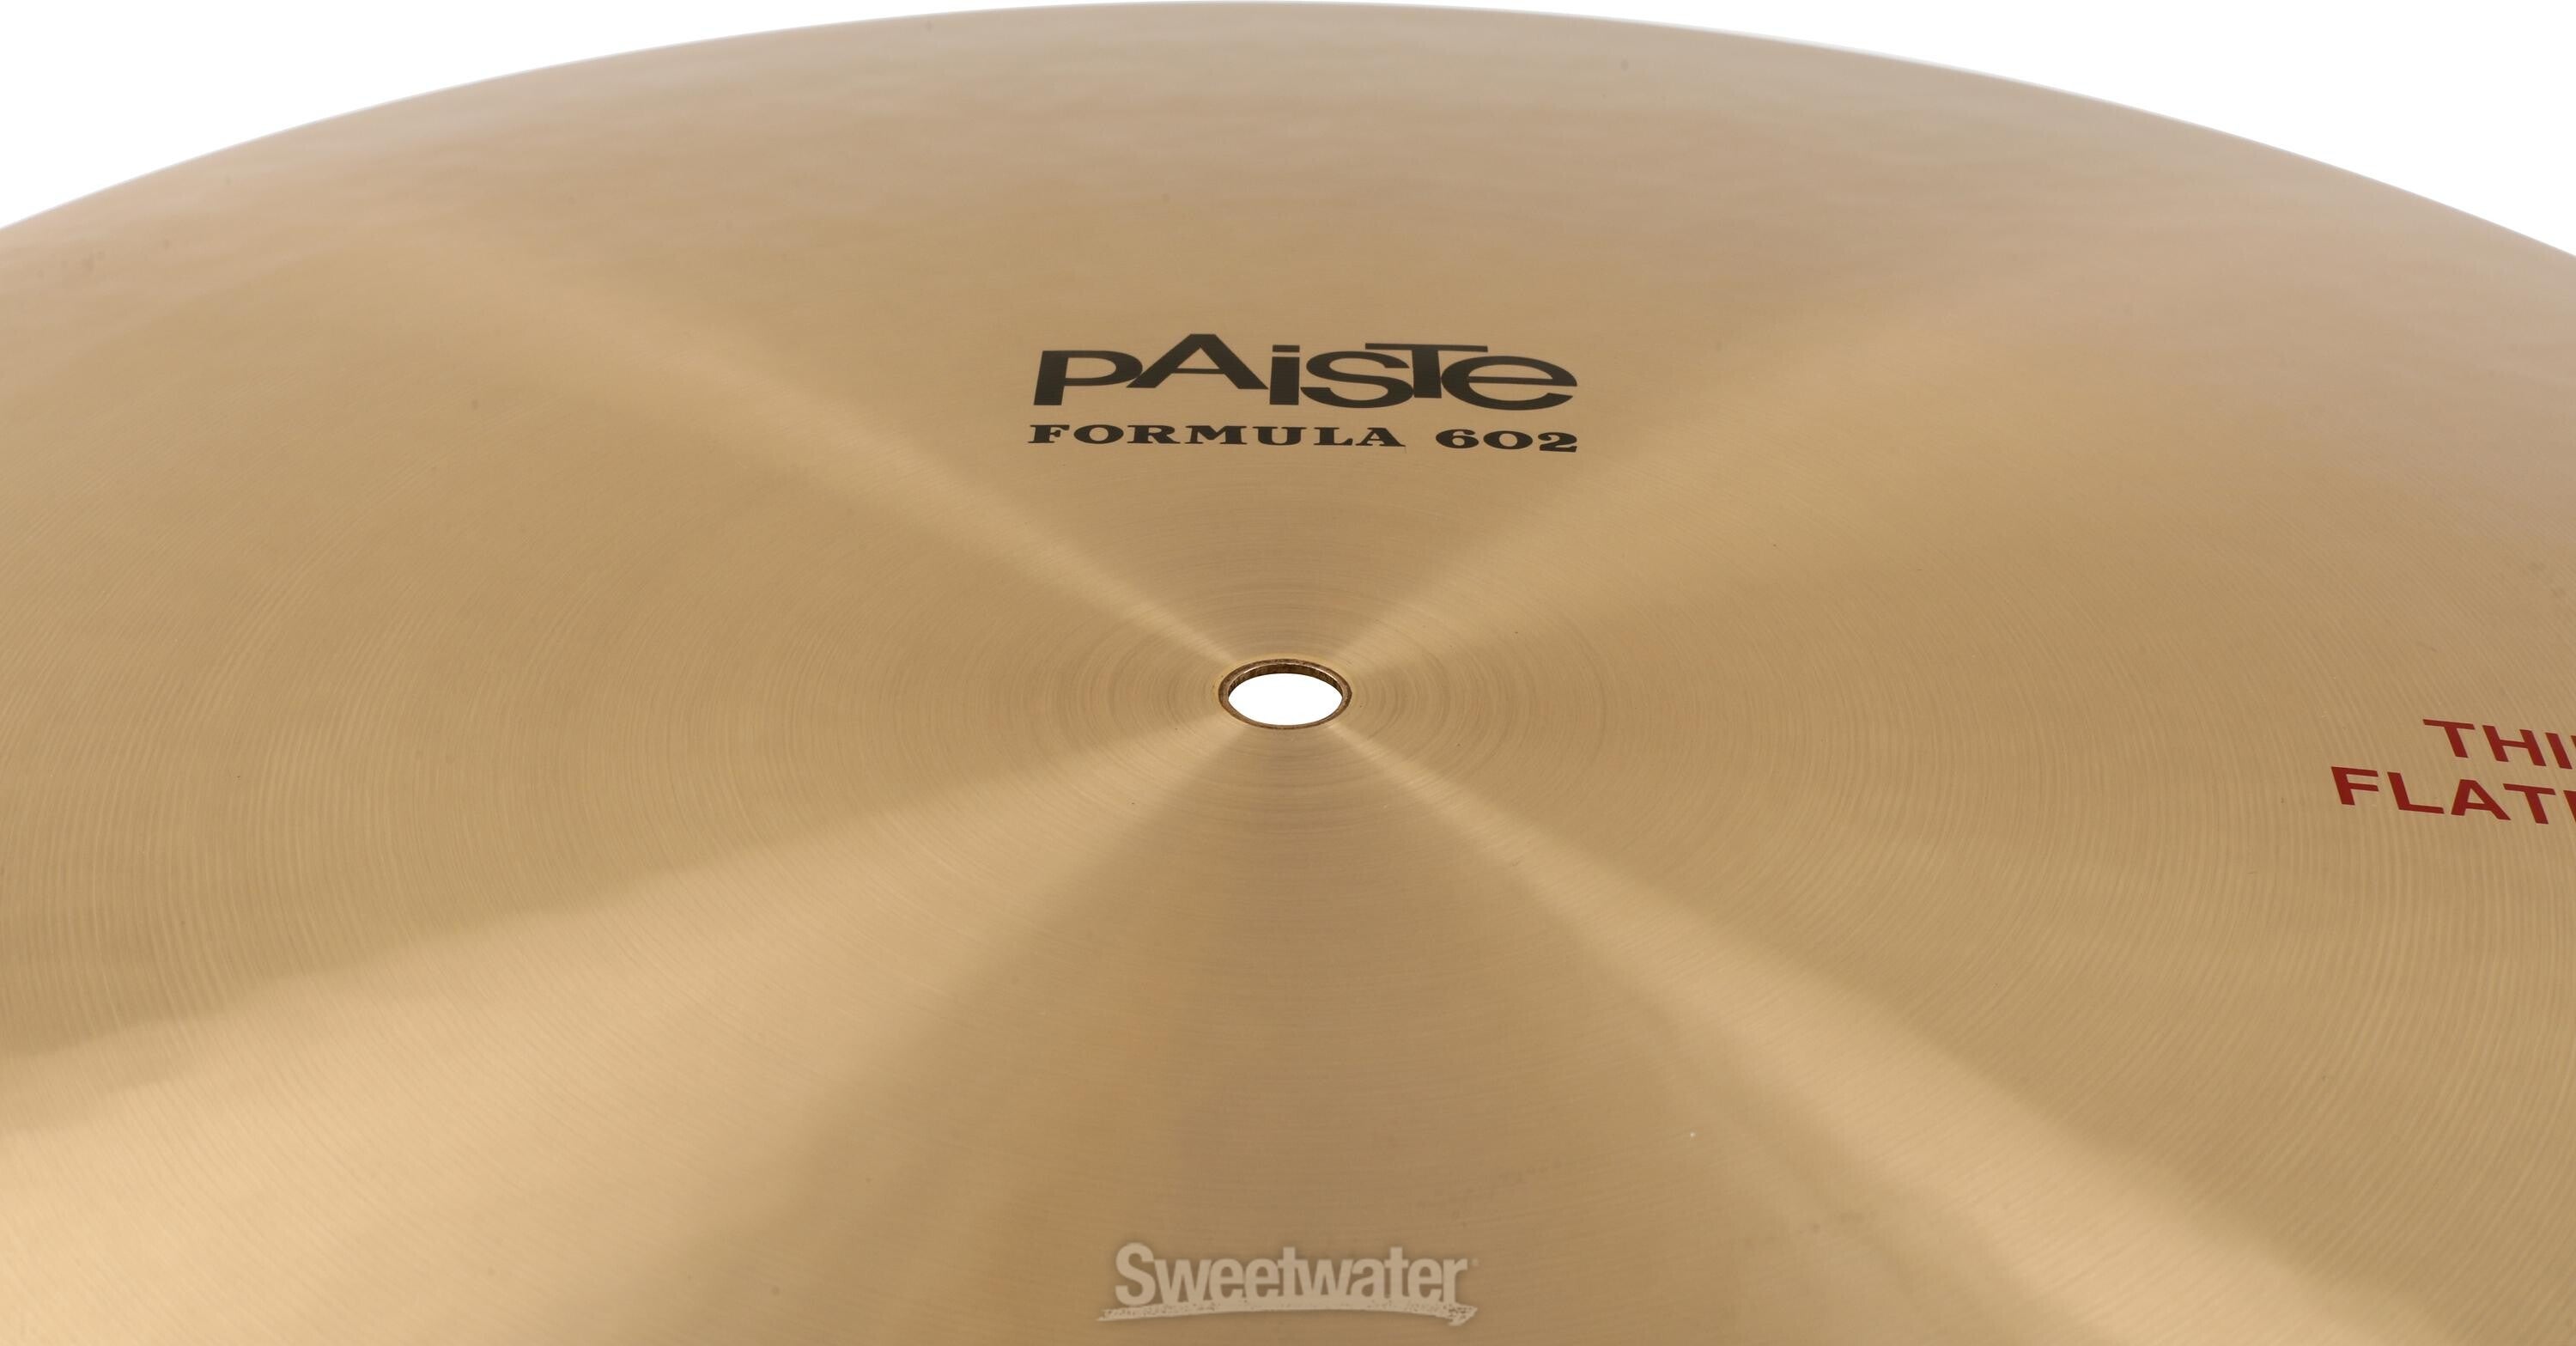 Paiste Formula 602 Thin Flat Ride - 20-inch | Sweetwater